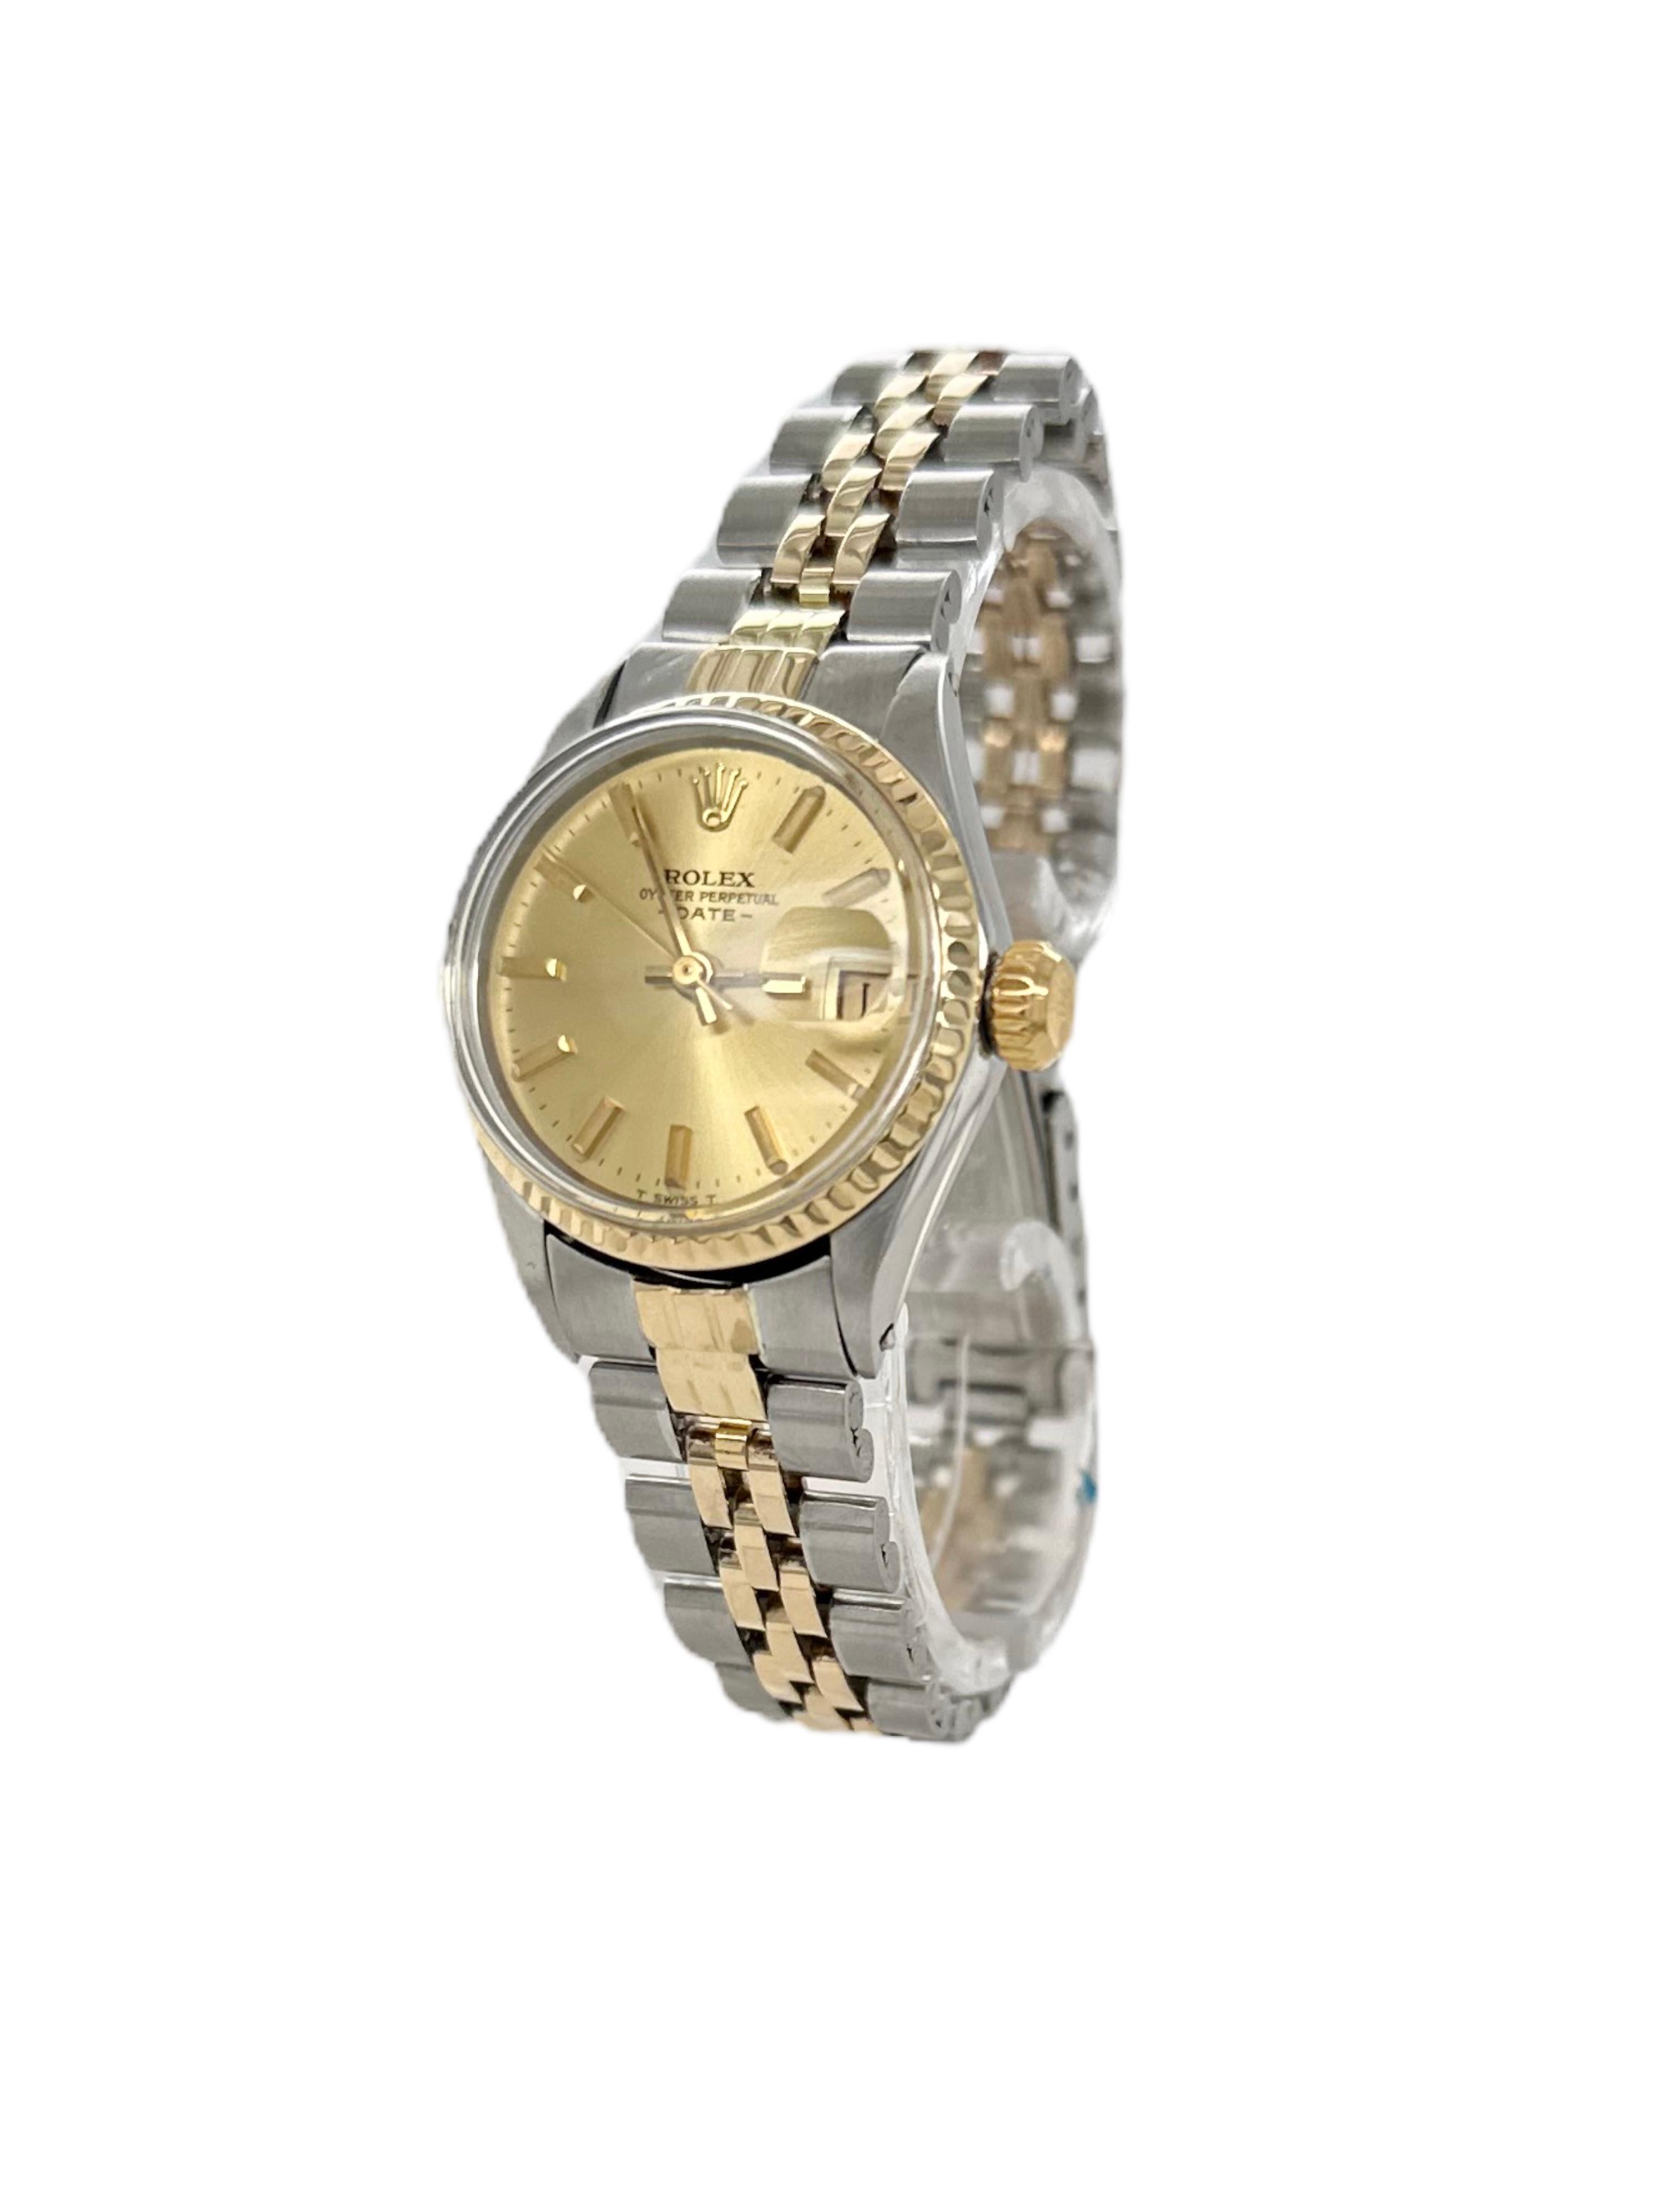 Rolex Oyster Date Ladies Bi Color Ref 6517 Automatic

Movement : Mechanical with Automatic Selfwinding, 26 Jewels
Case : Steel and Gold 26mm
Strap : Steel and Gold